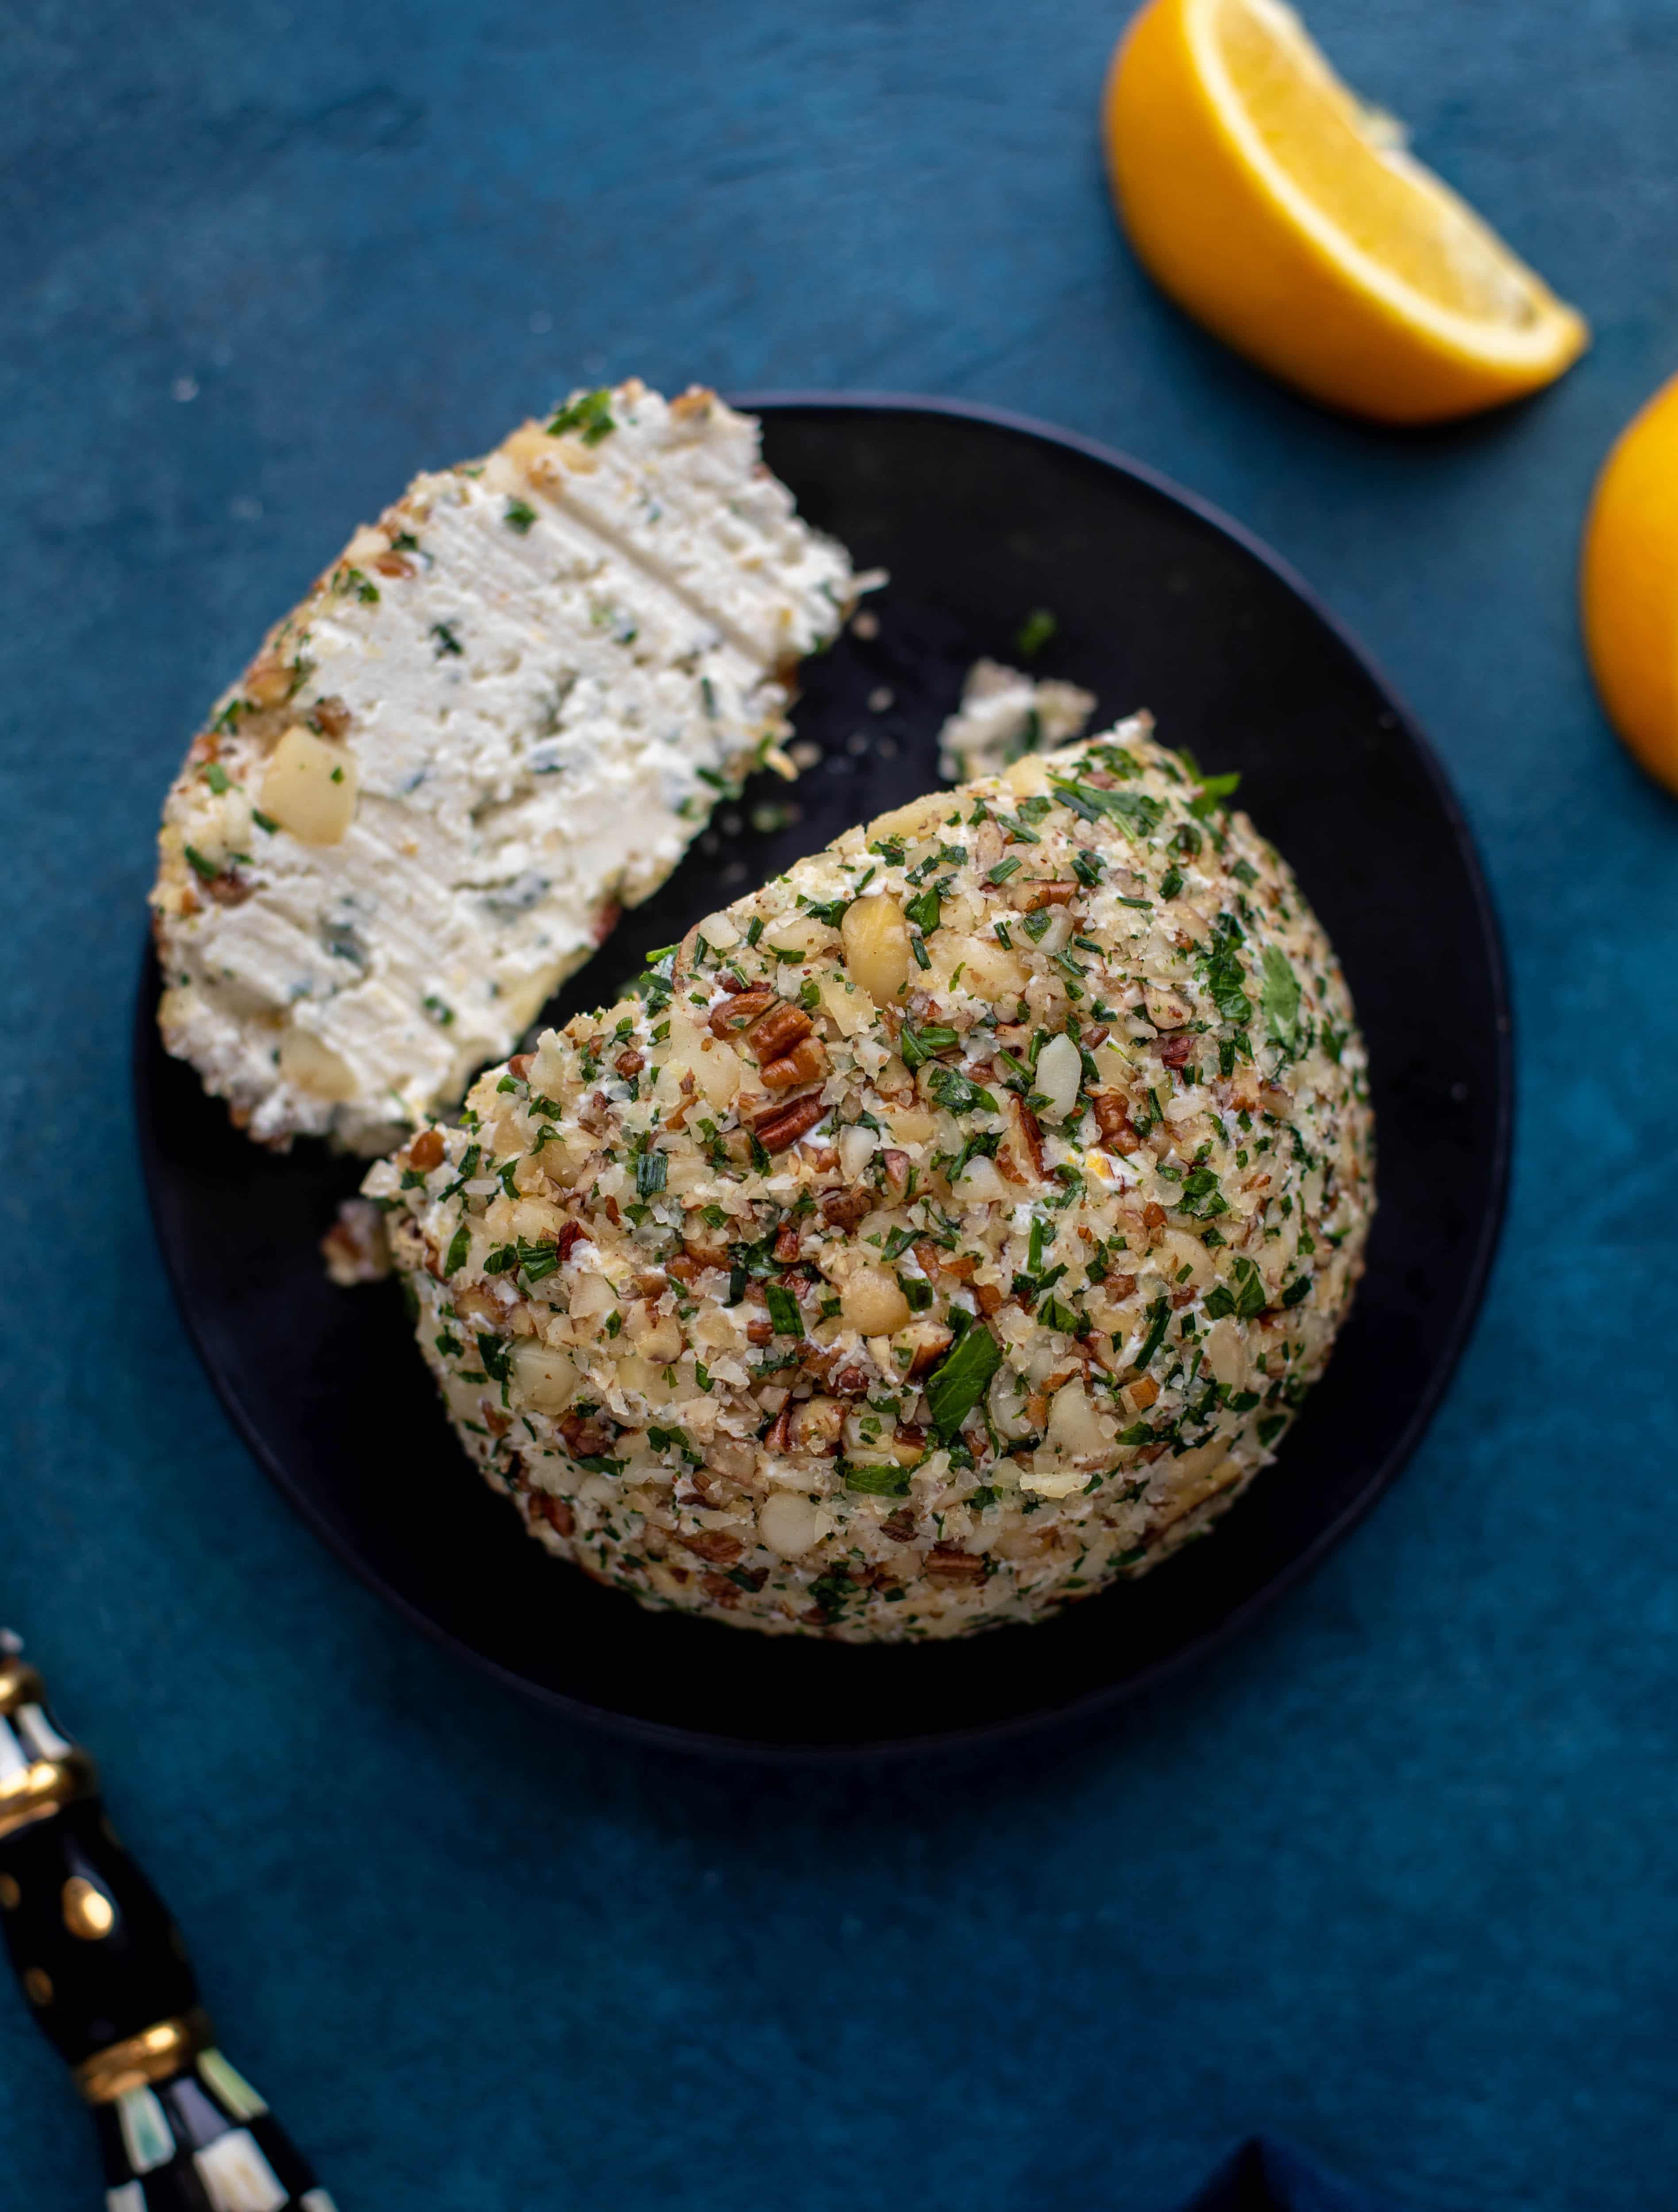 This macadamia nut cheeseball is flavored with fresh orange, spices, crispy sage and pecorino cheese. It's the perfect make-ahead snack!